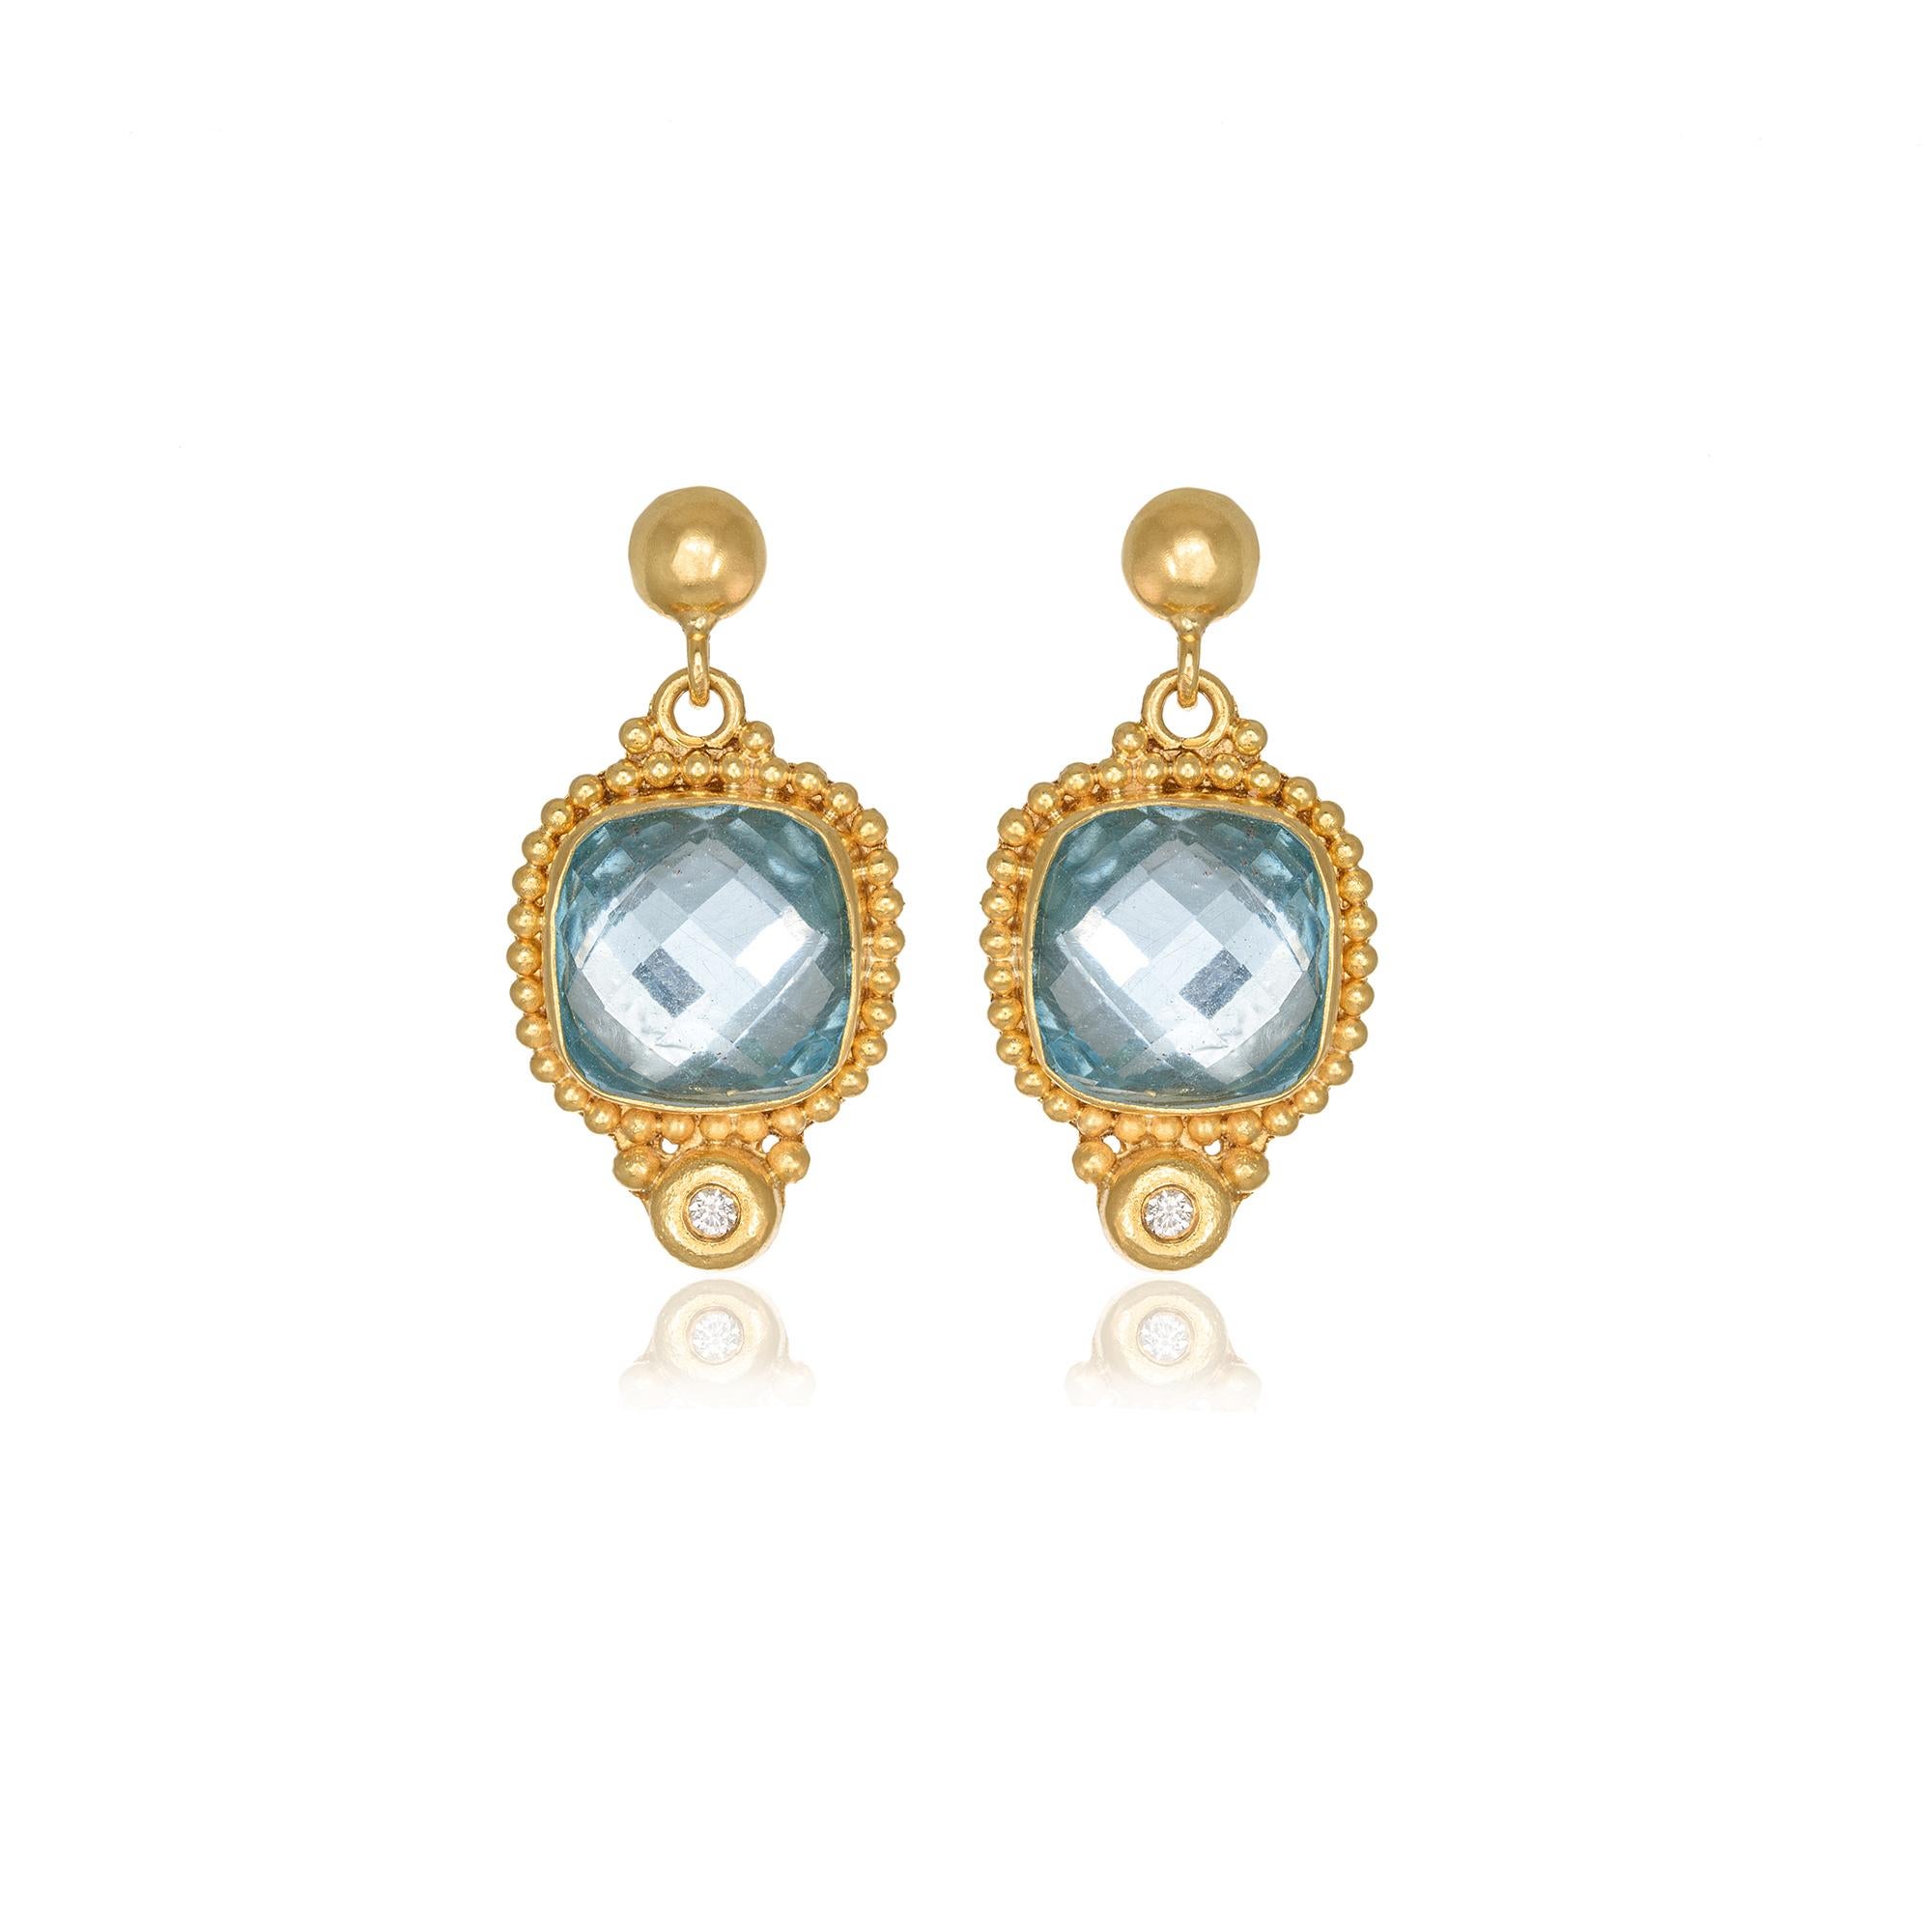 Drop earrings with cushion Blue Topazes and two briliiant cut diamonds, handcrafted in 22Kt yellow gold. This majestic pair of earrings is created using the superb technique of granulation, where minute gold beads are carefully put around the Blue